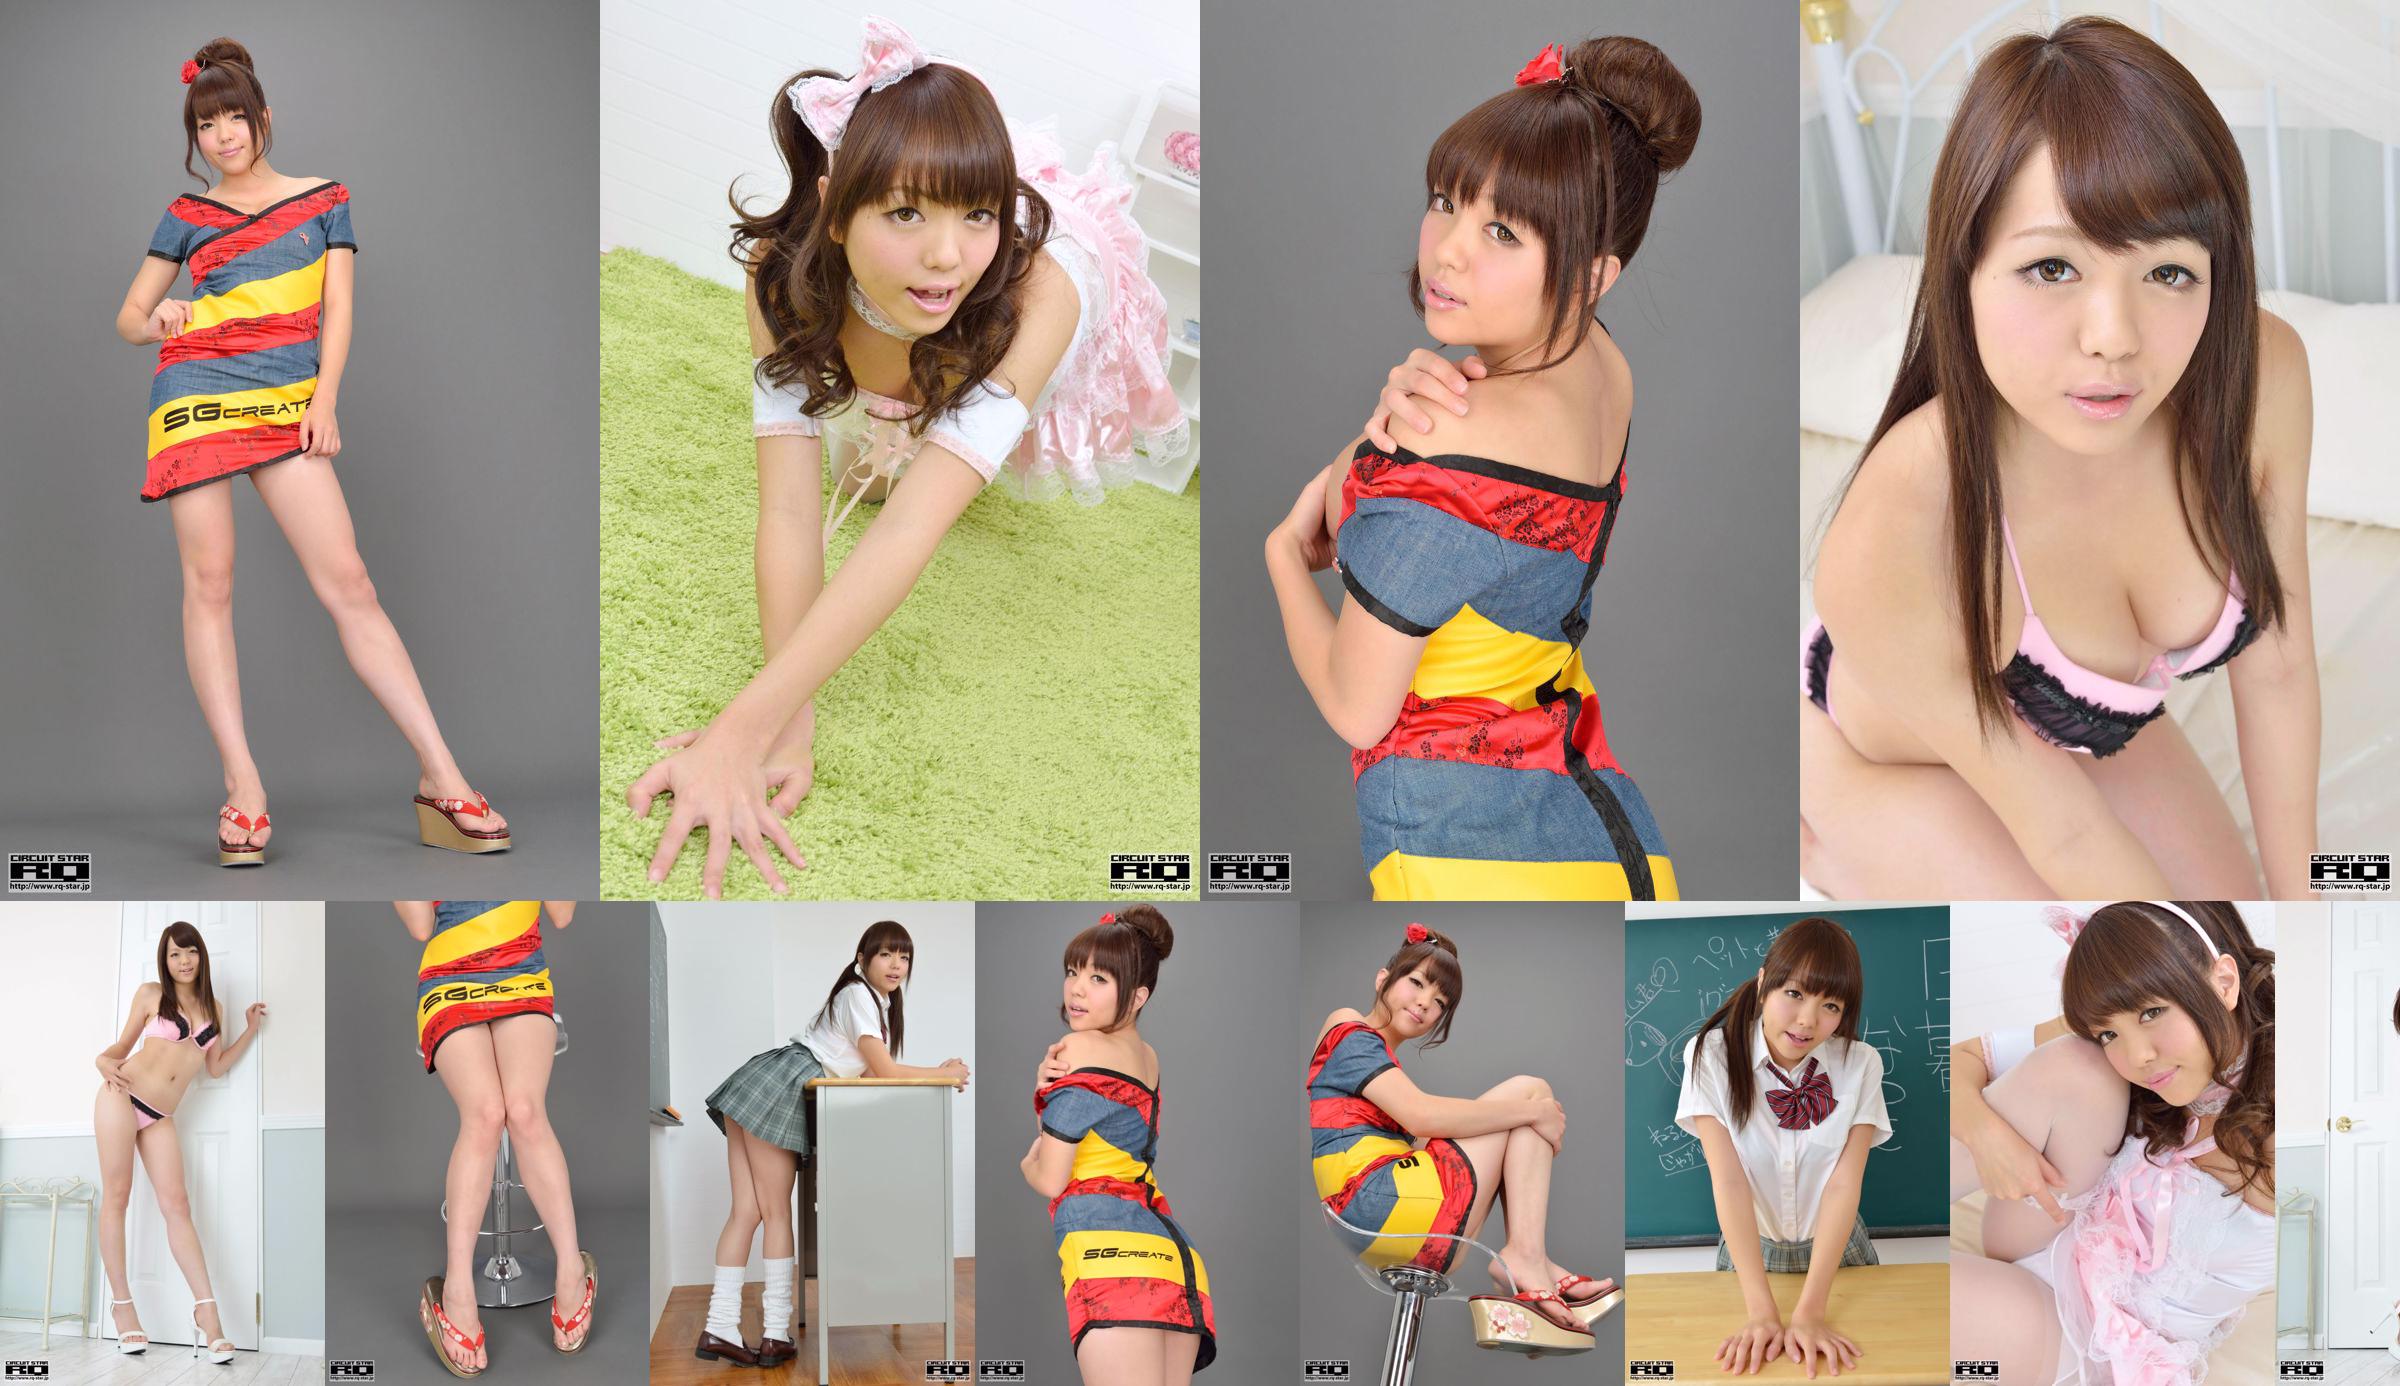 [RQ-STAR] NO.00736 日晚 な つ き Costume Play Lace Beautiful Girl-serie No.aaed23 Pagina 1